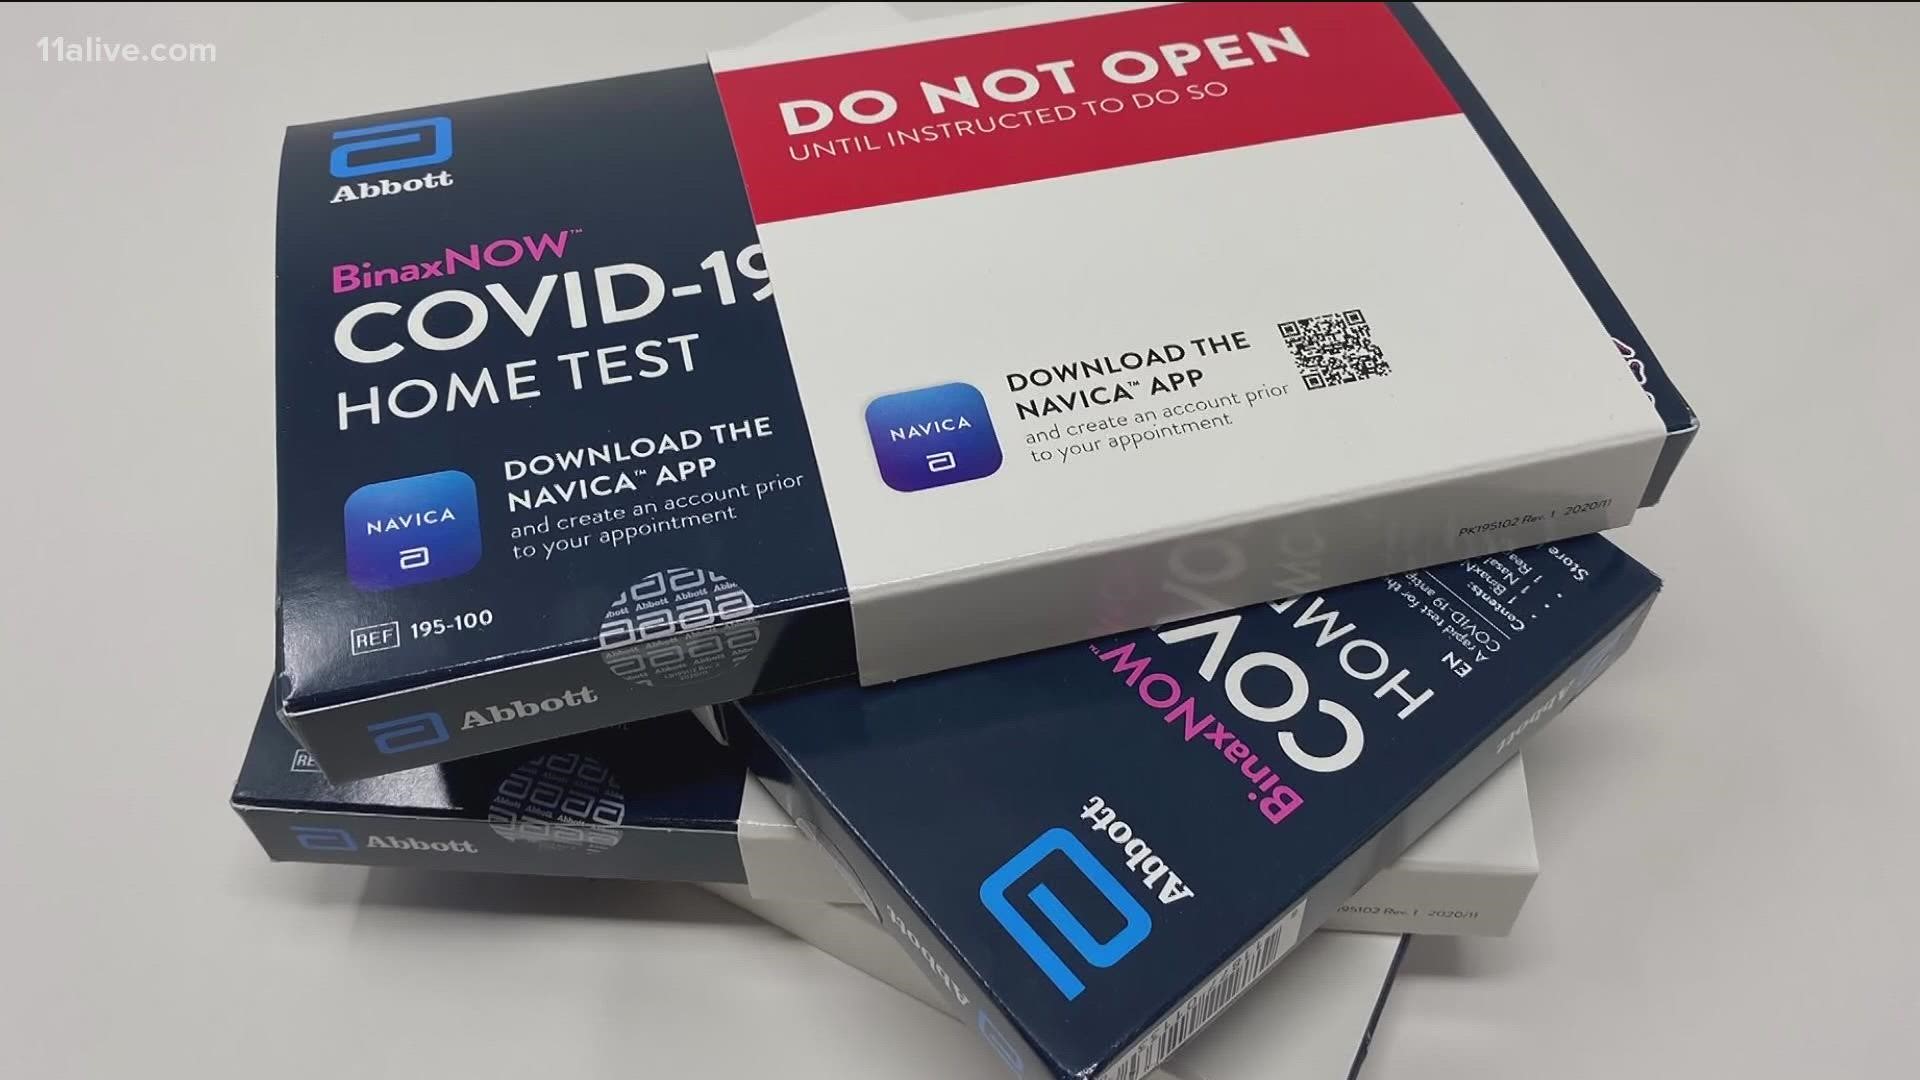 Pharmacies are working to keep up with at-home testing demand as pop-up clinics see long lines.